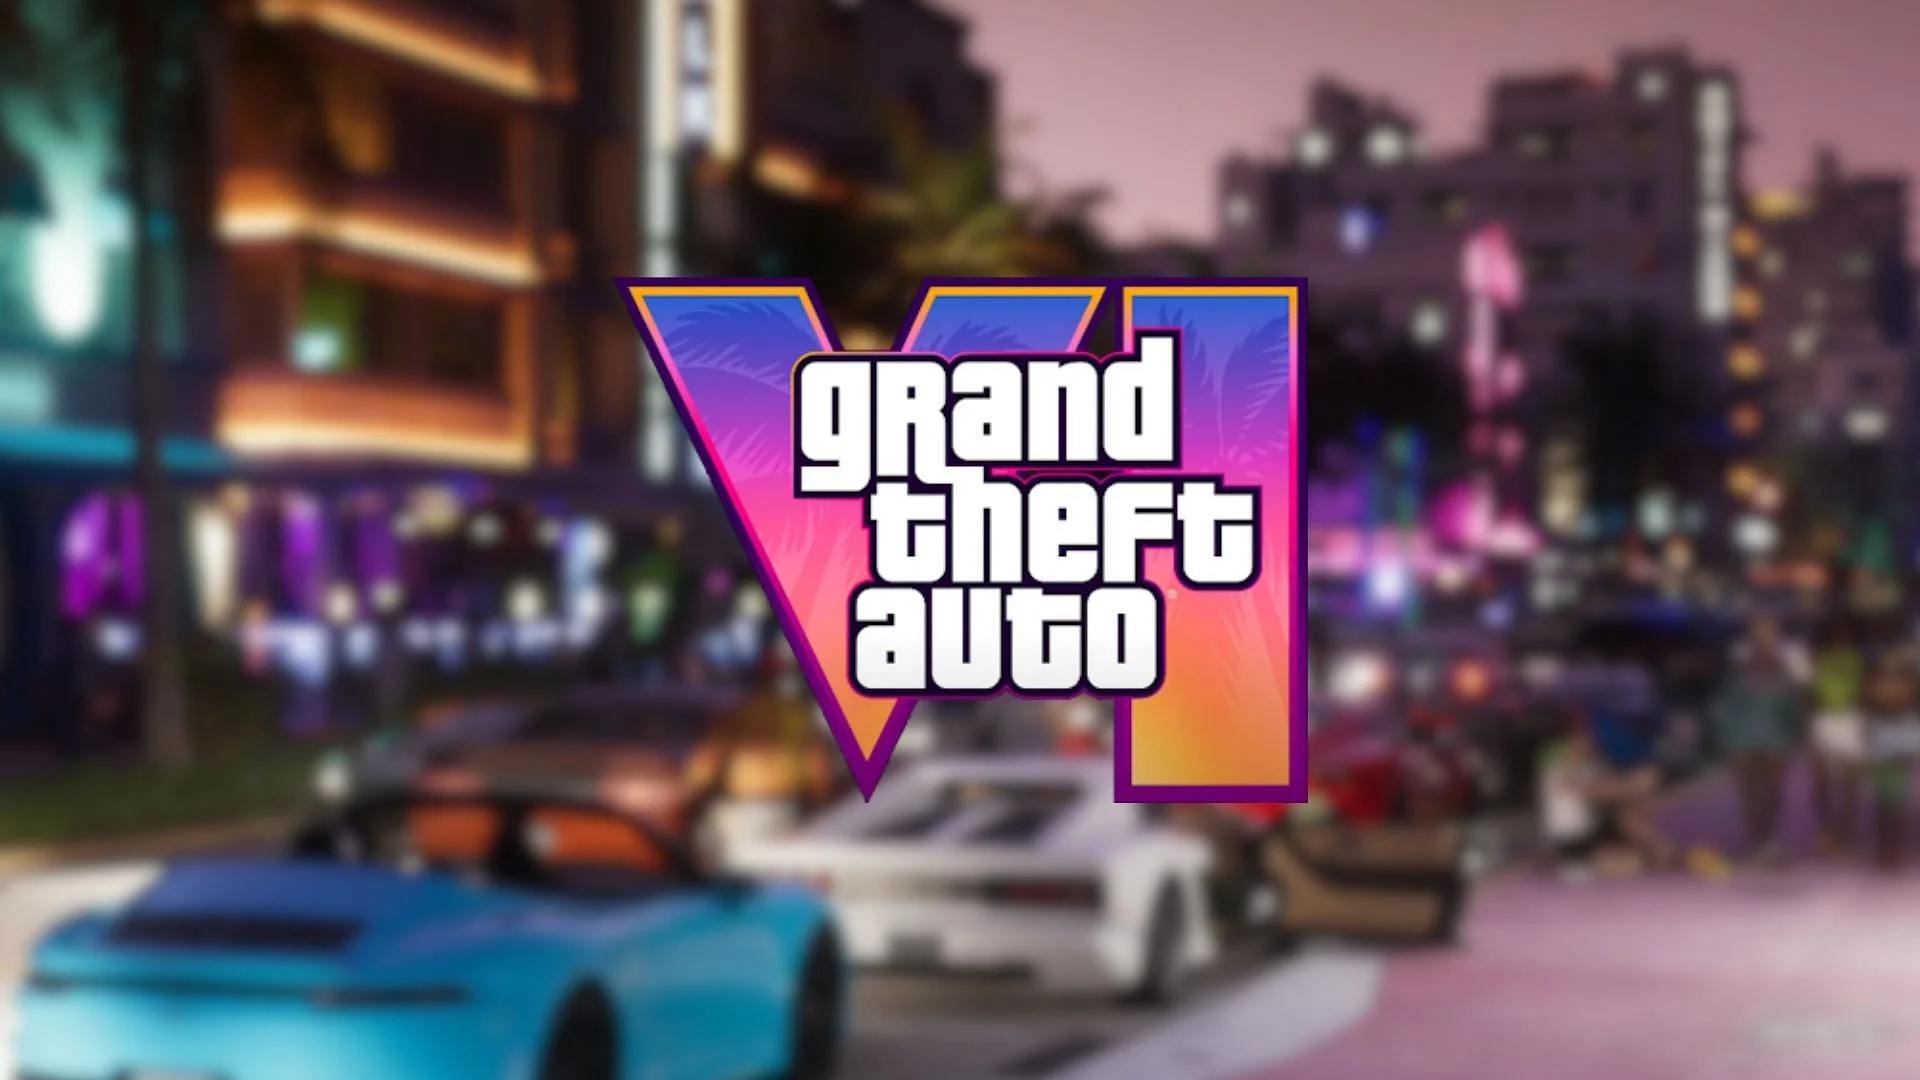 Exposed: GTA 6 Leak Claim Debunked - The Truth Behind the Viral Vice City Image